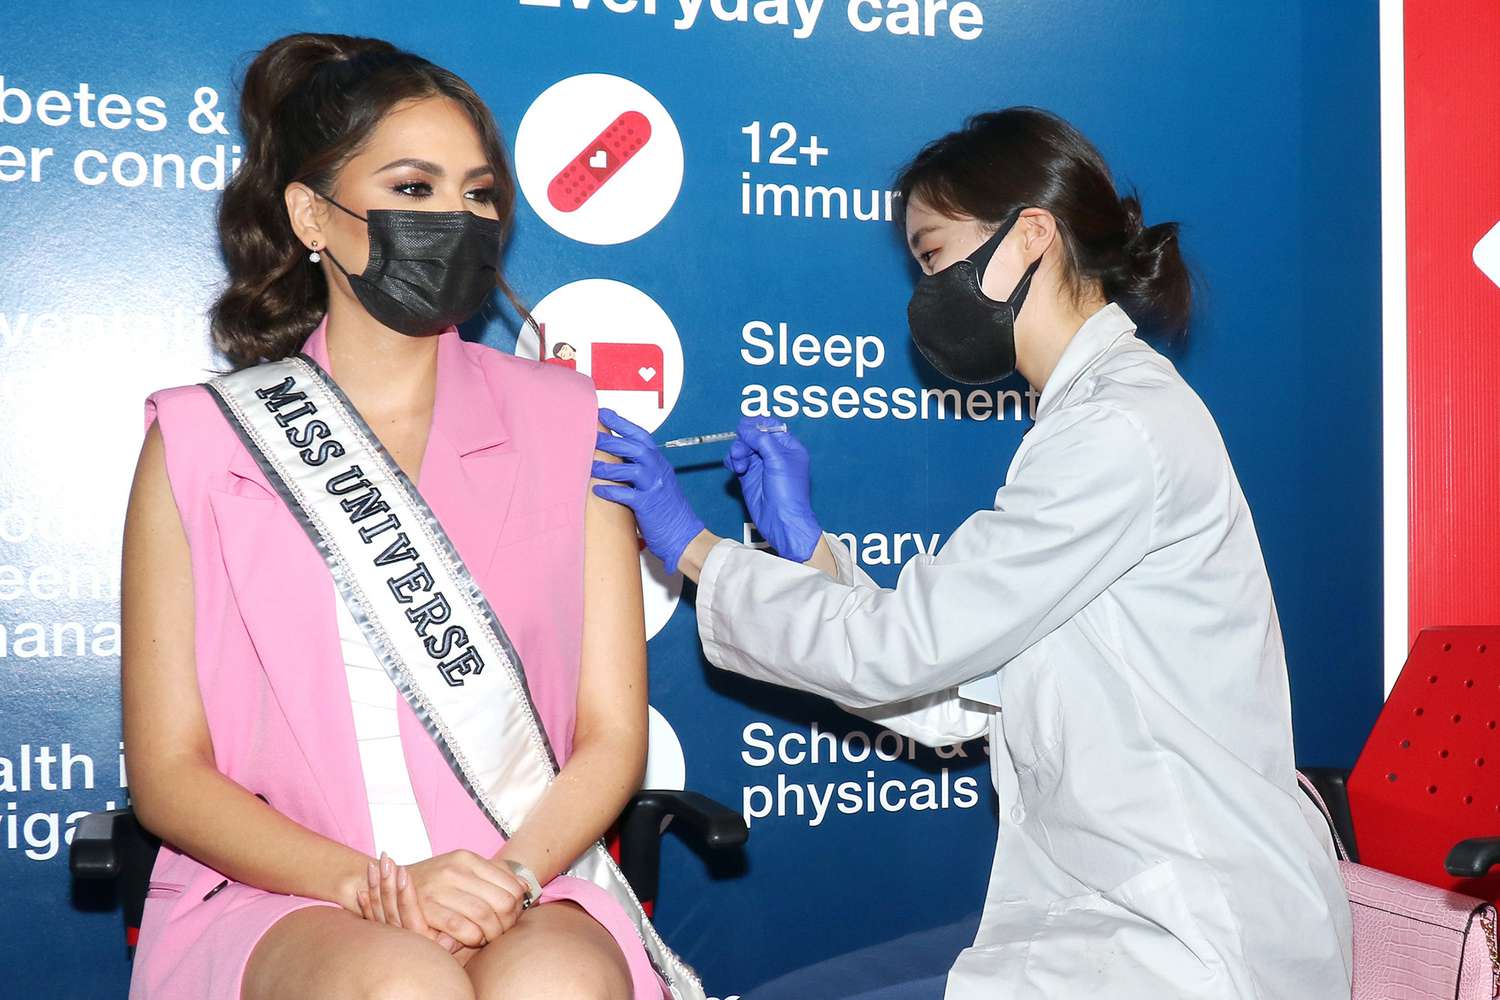 Miss Universe Andrea Meza Receives Her COVID-19 Vaccine As Her First Official Act As Miss Universe